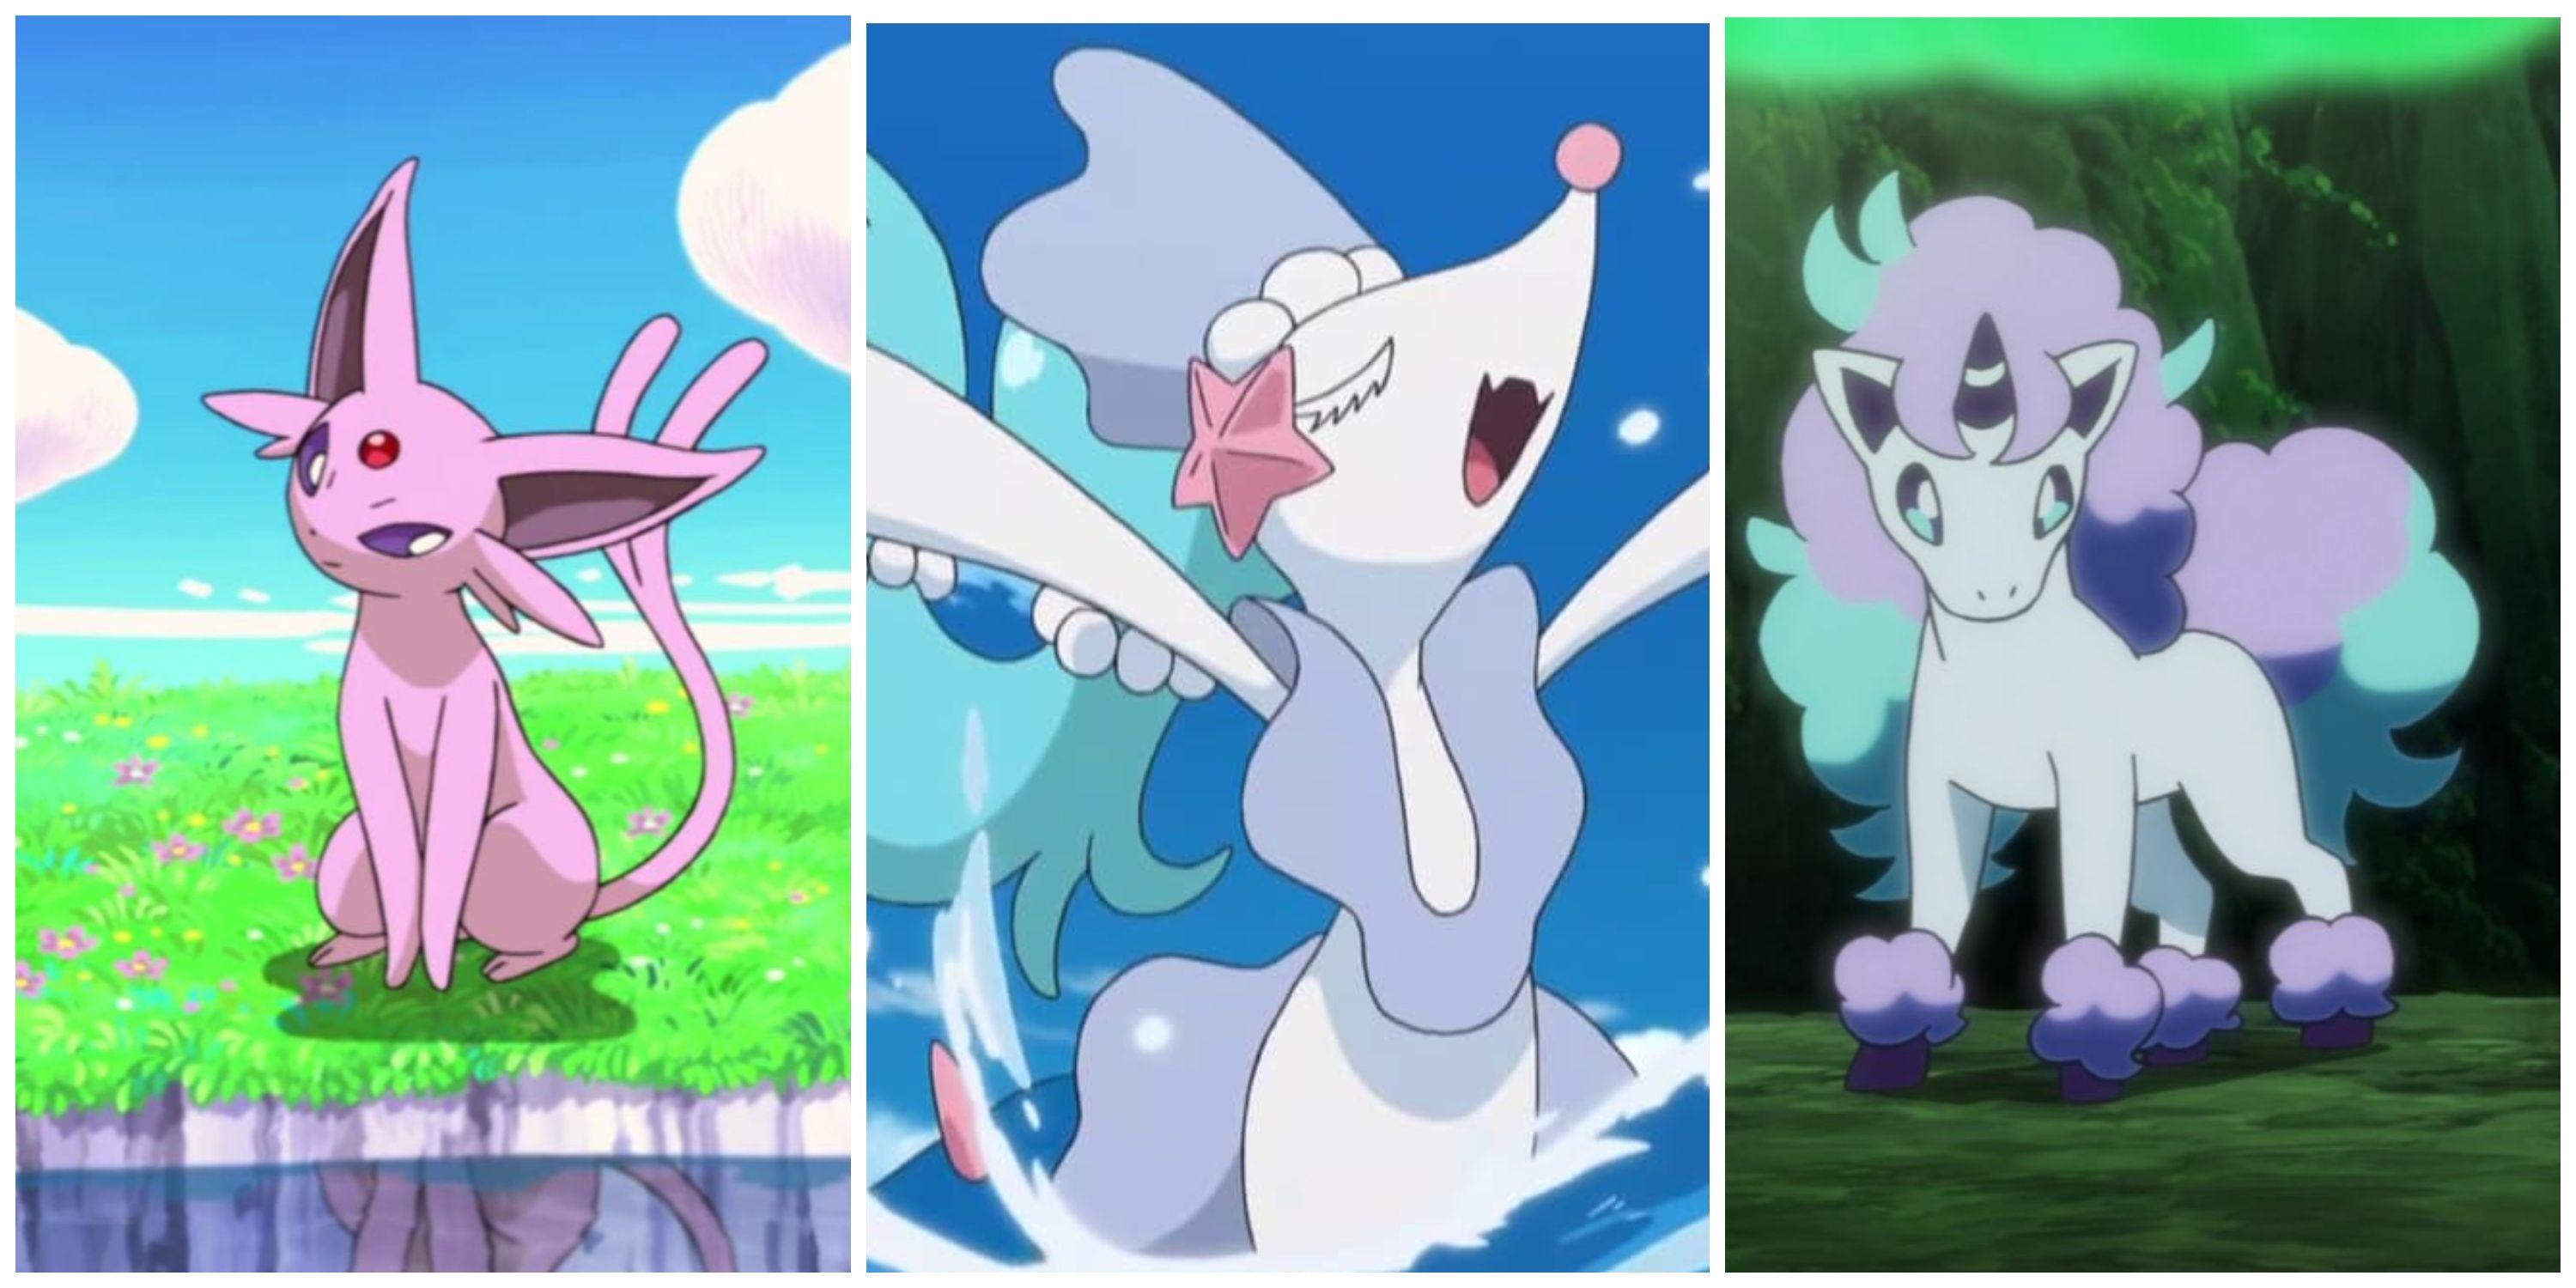 Split image, Espeon sitting on a field of flowers, Primarina swinning in the waves, and a Galaraian Ponyta in Pokemon